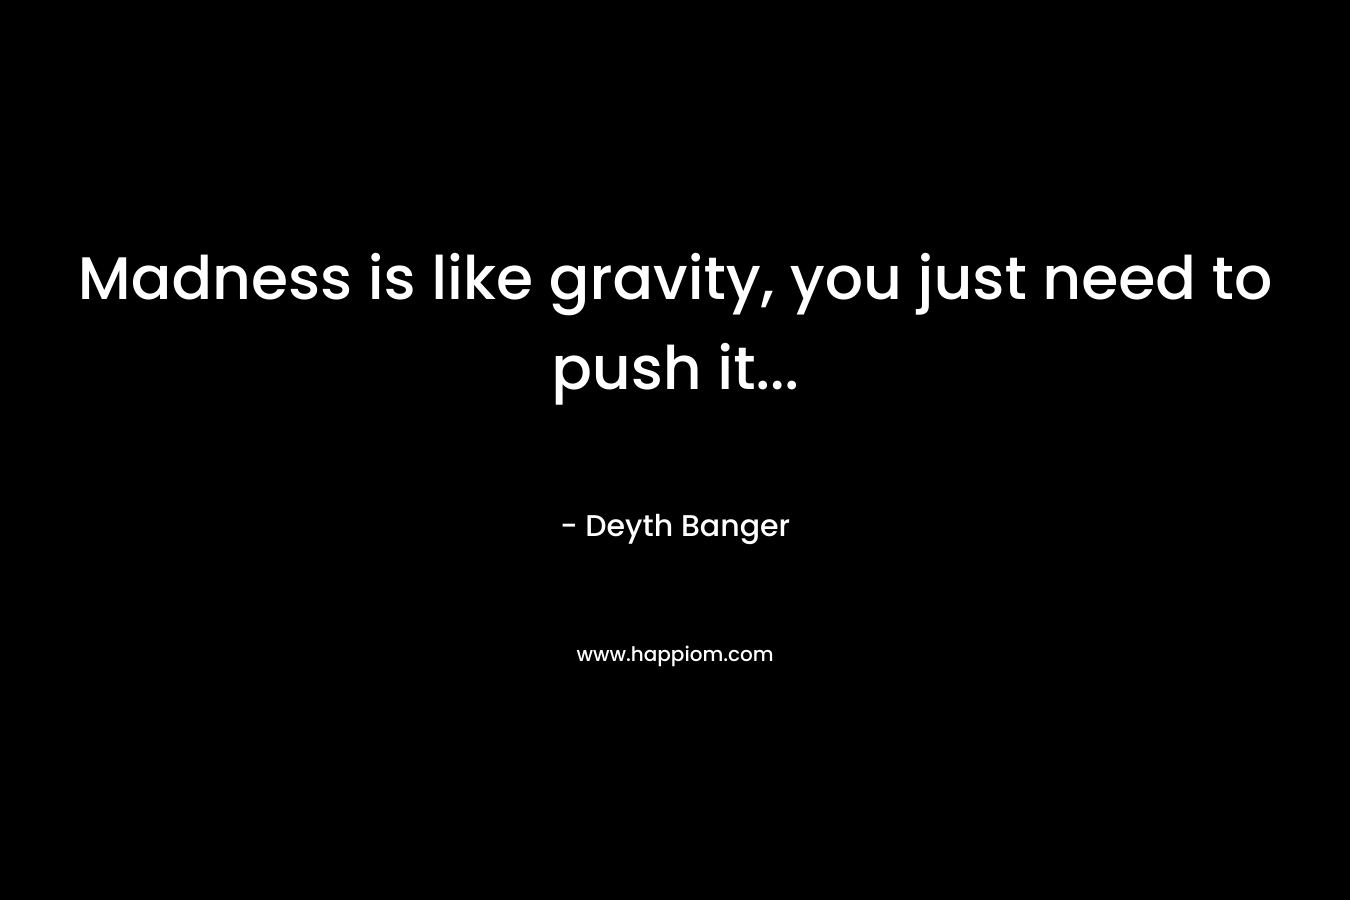 Madness is like gravity, you just need to push it… – Deyth Banger